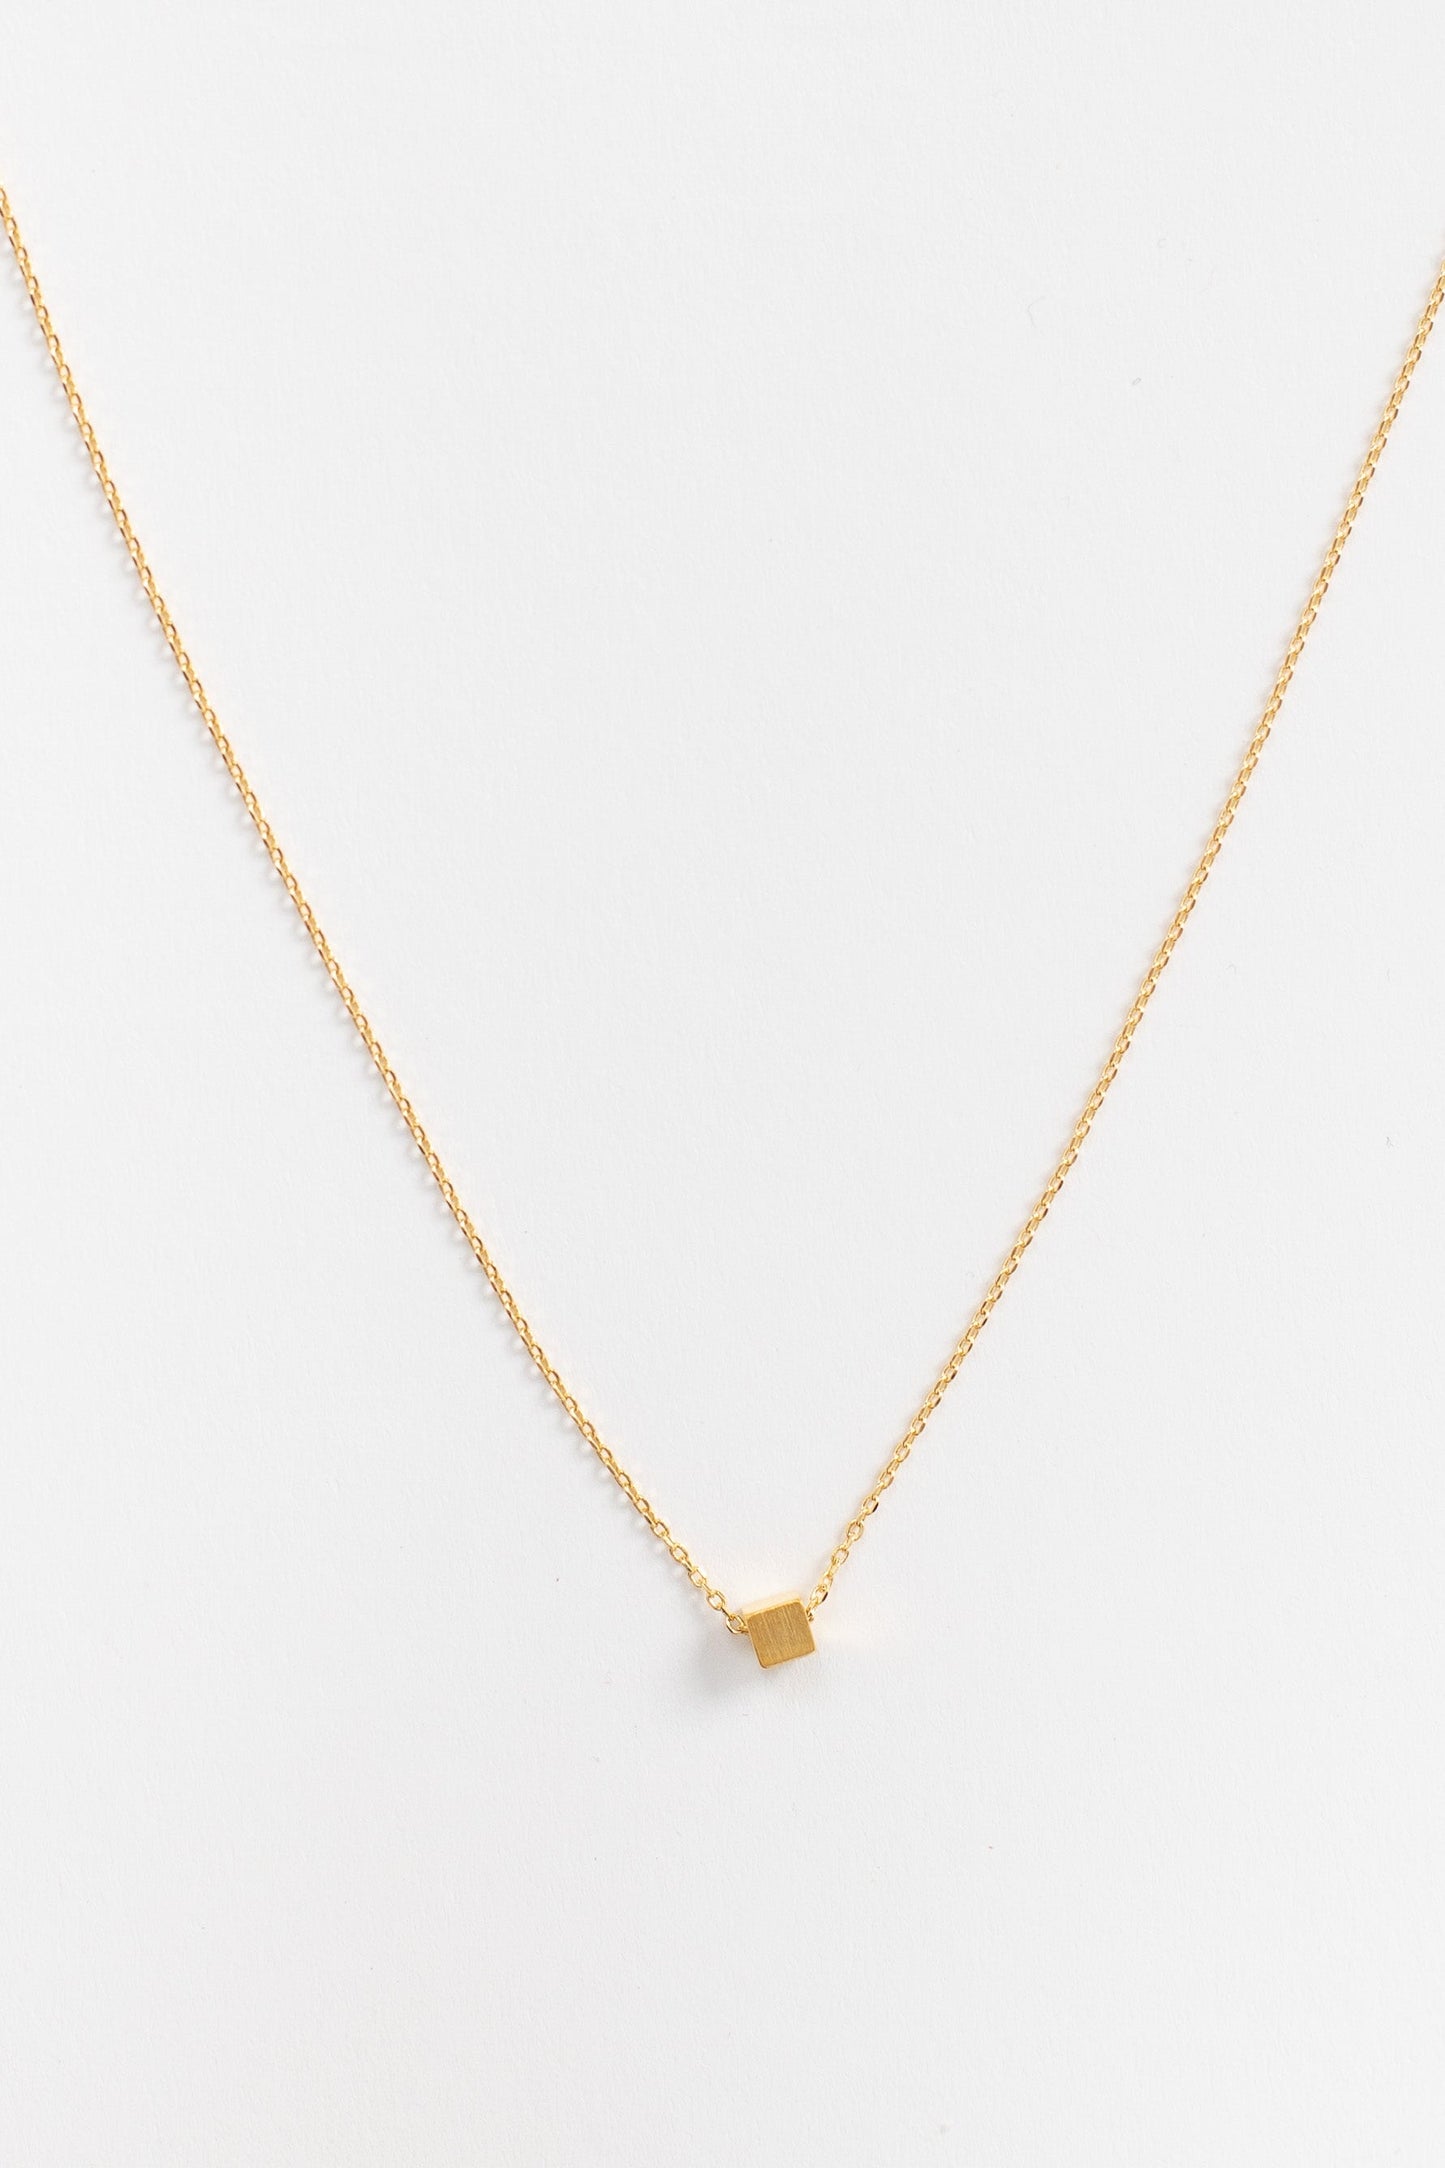 Floating Block WOMEN'S NECKLACE Cove Gold 16" 